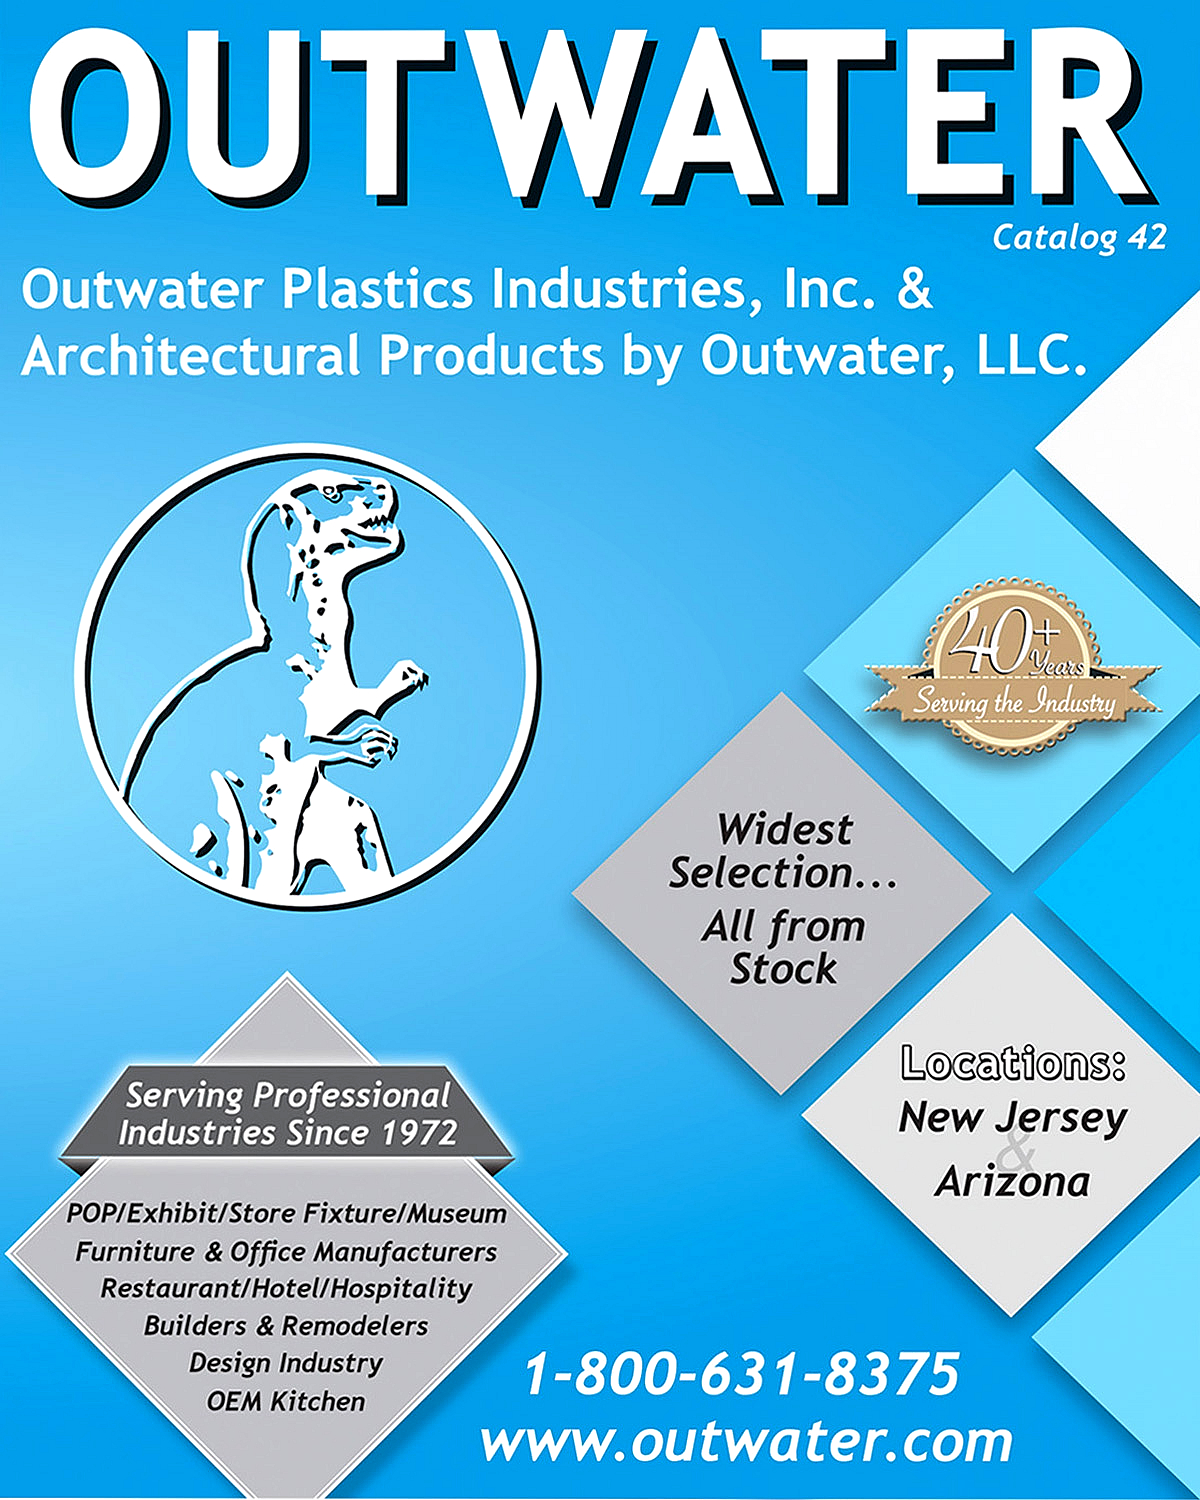 Outwater offers more than 65,000 traditional and innovative products